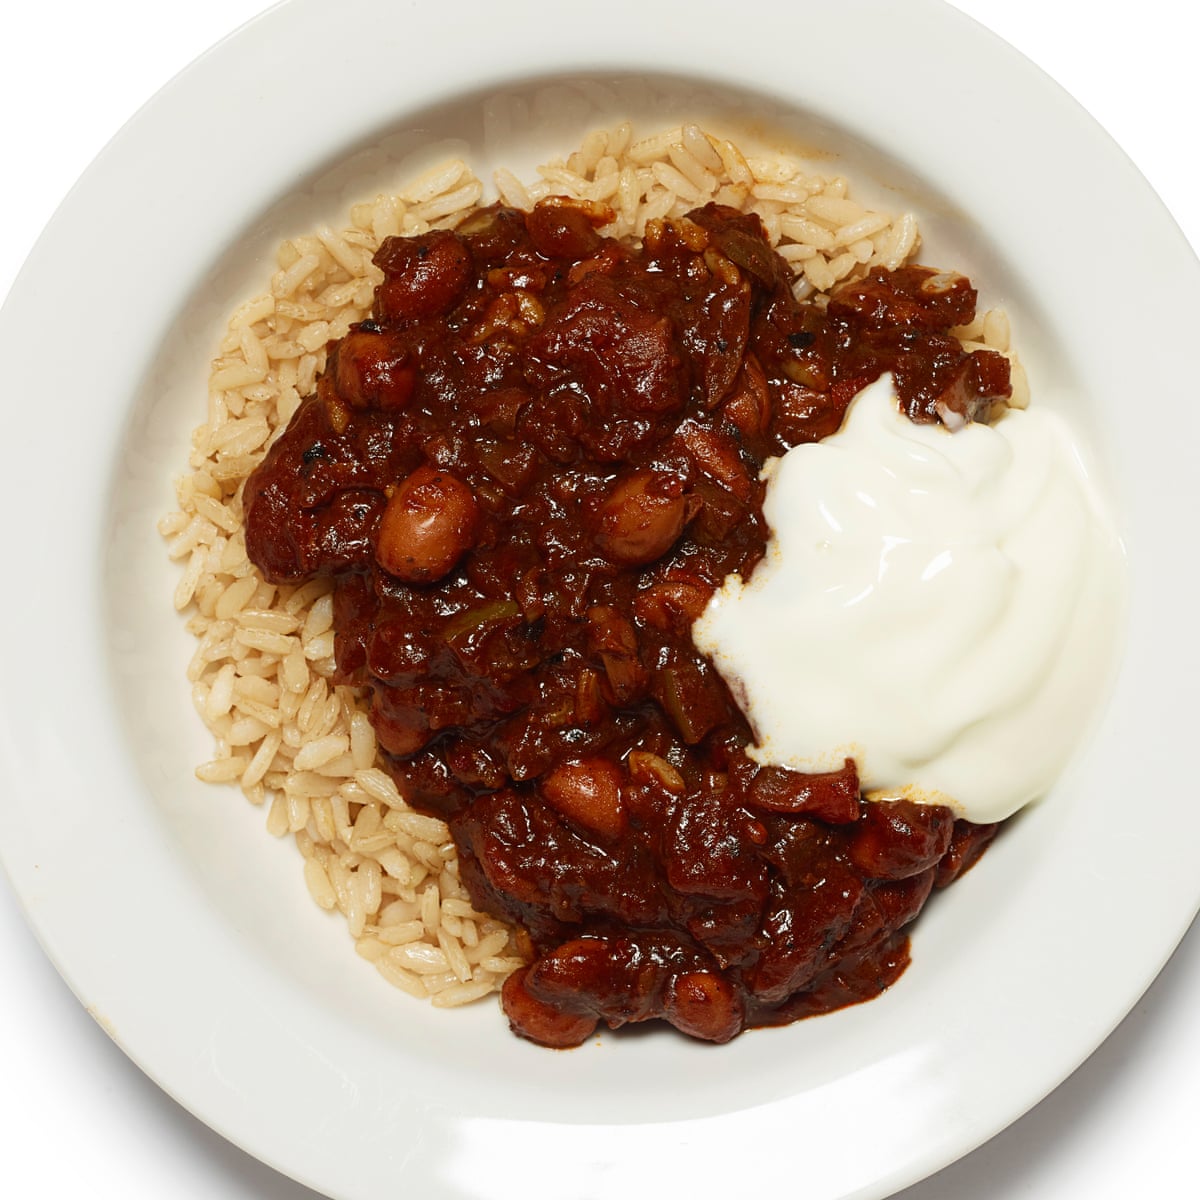 Felicity Cloake S Perfect Vegetarian Chilli Recipe Food The Guardian